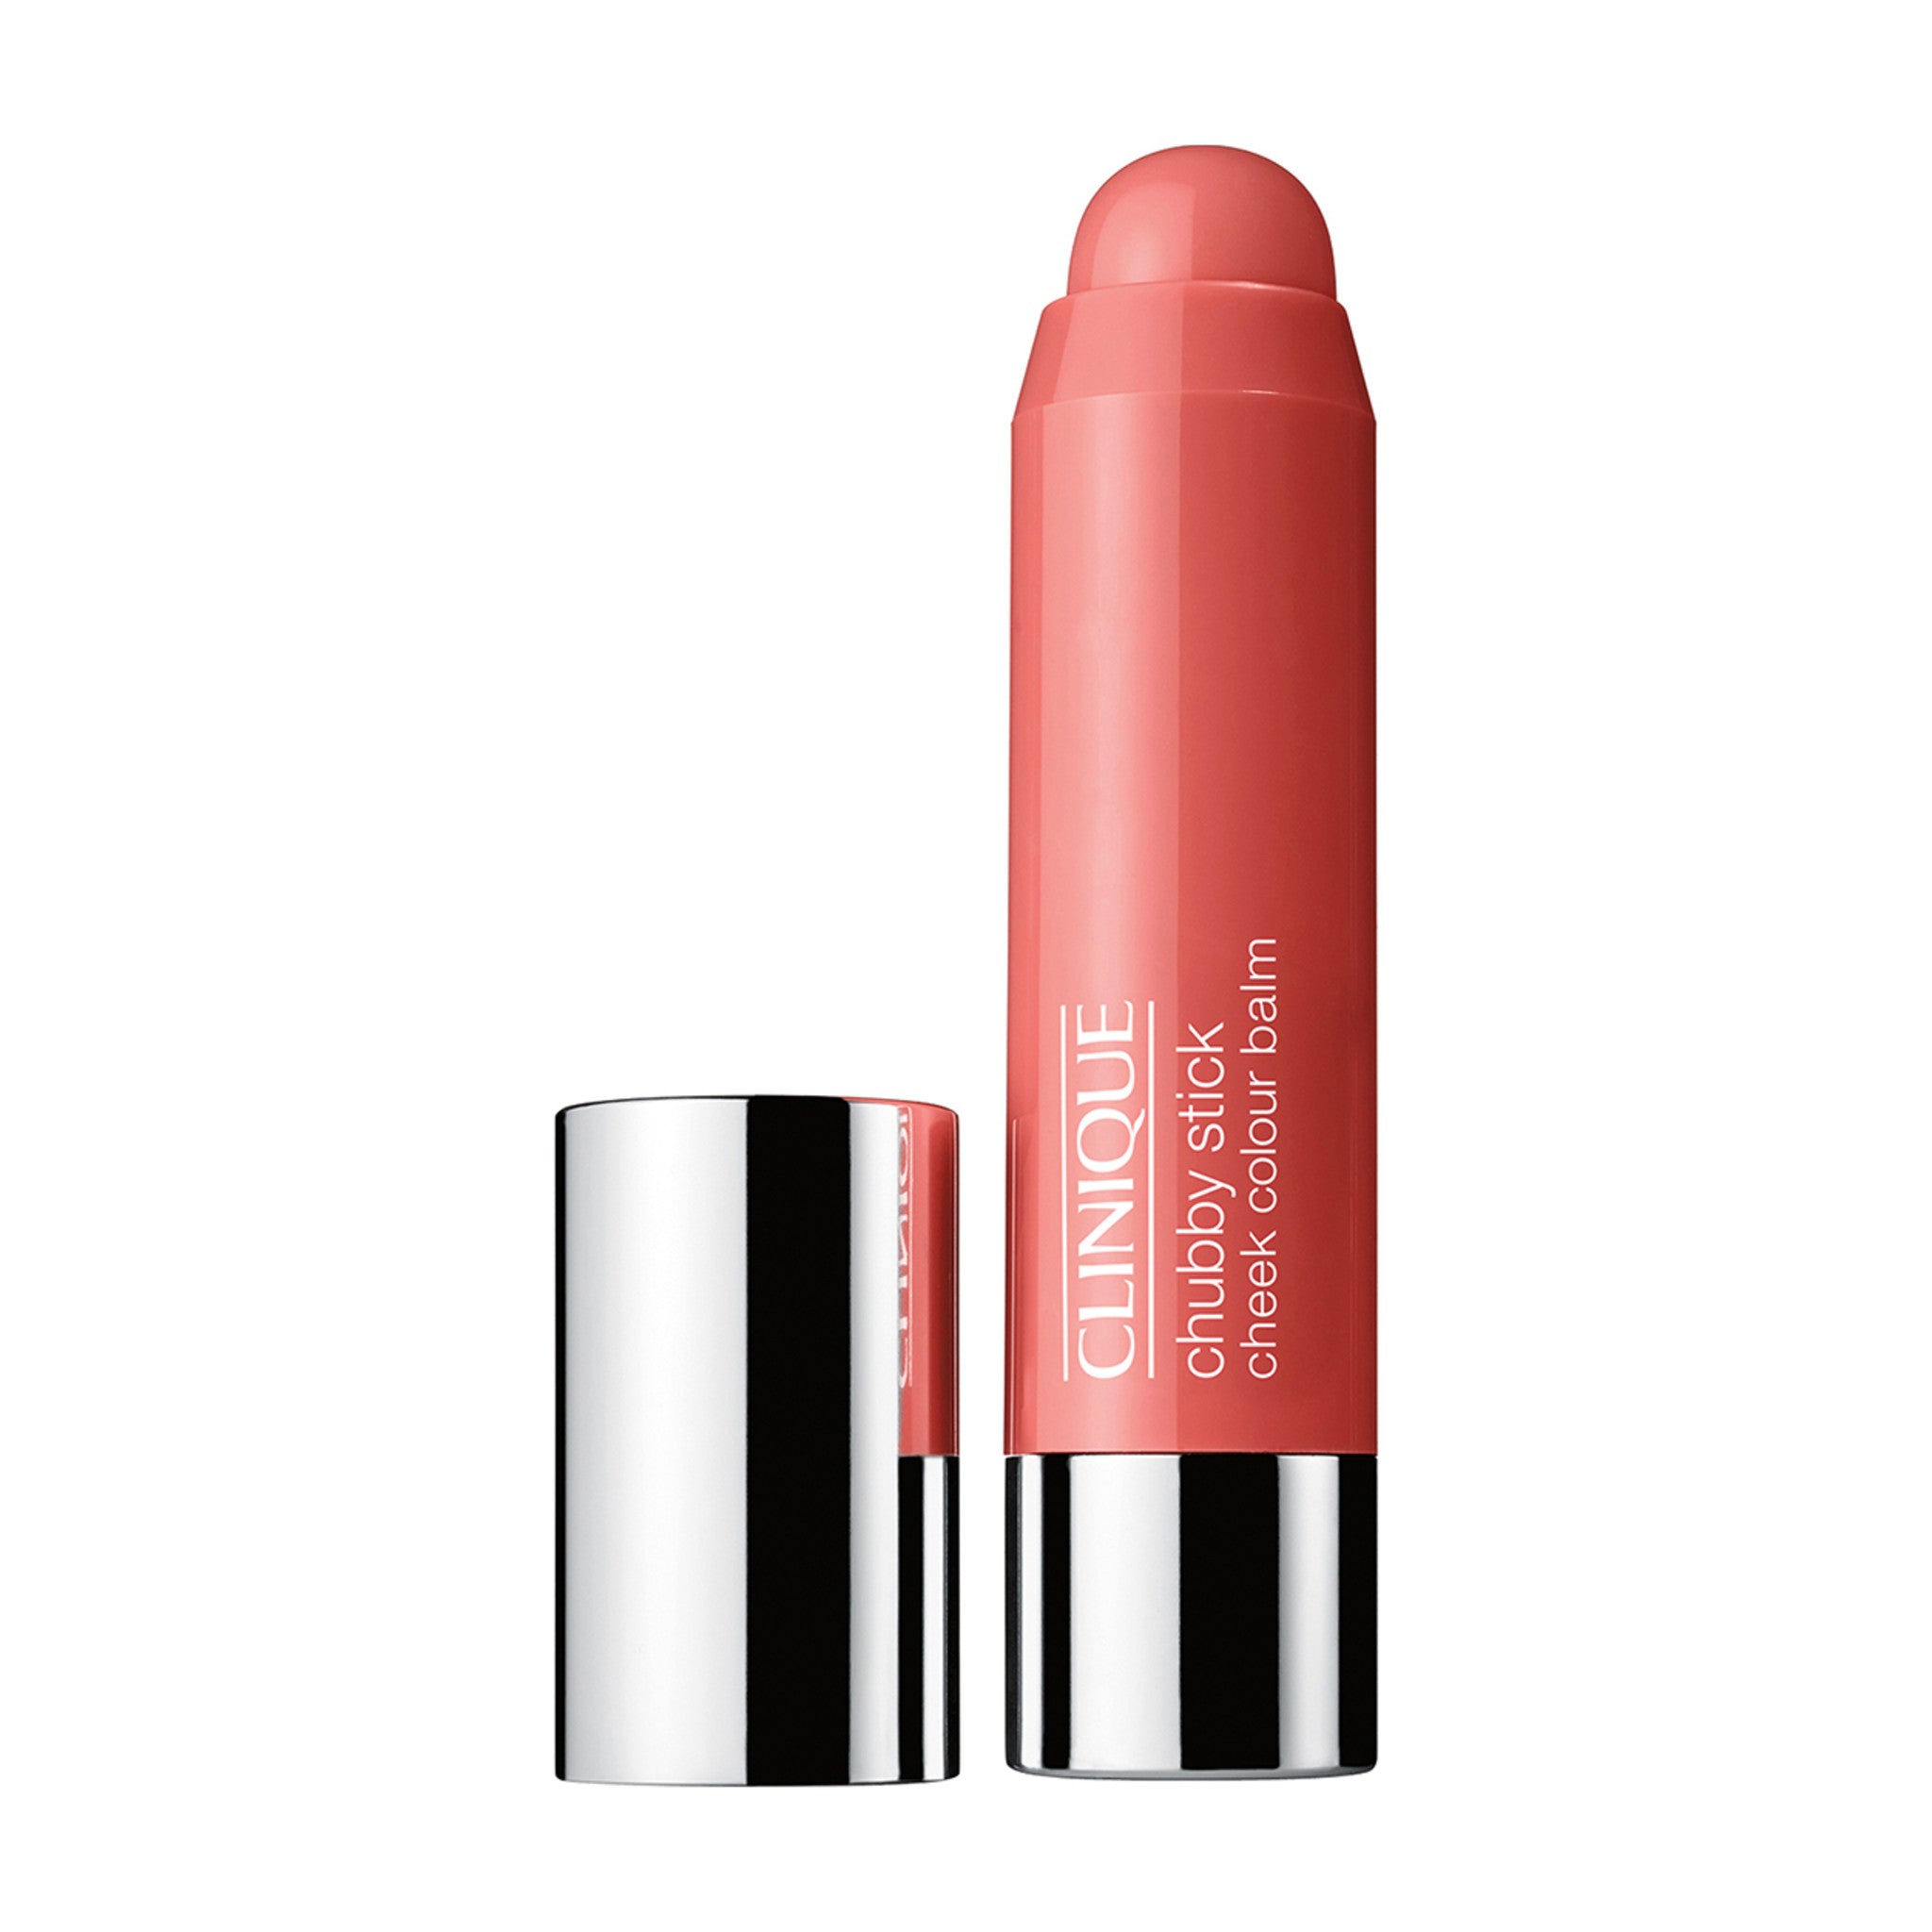 Clinique Chubby Stick Cheek Colour Balm Color/Shade variant: Plumped Up Peony main image. This product is in the color nude